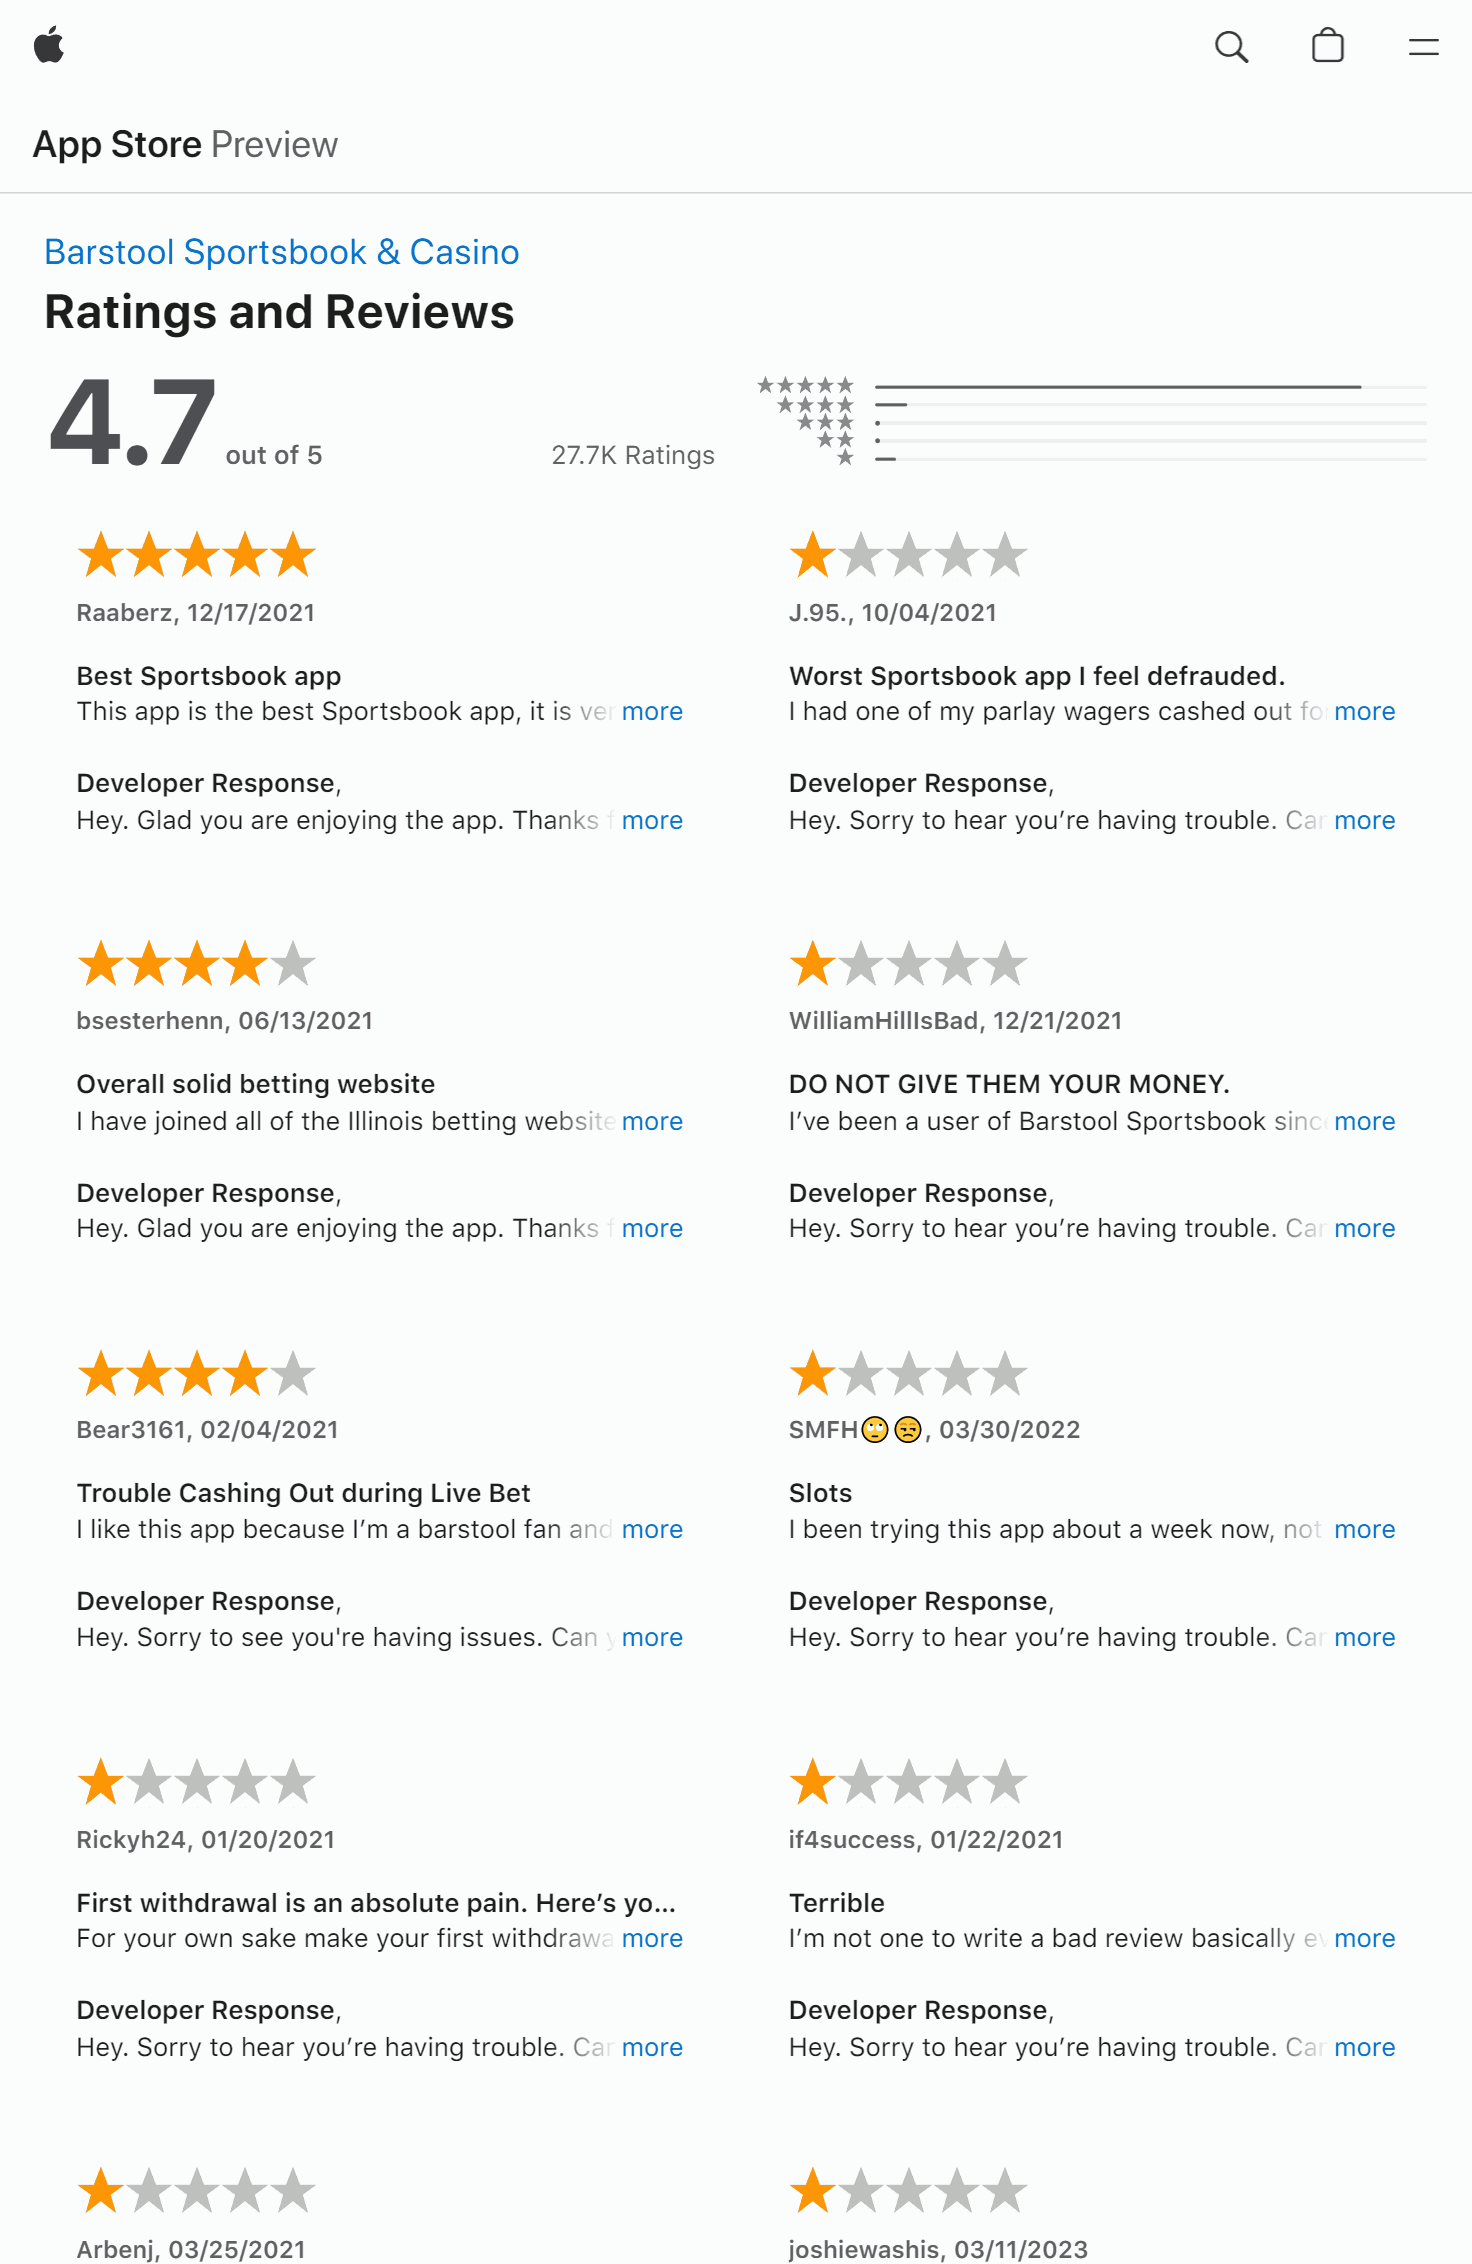 Apple App store ratings and reviews for the Barstool WV